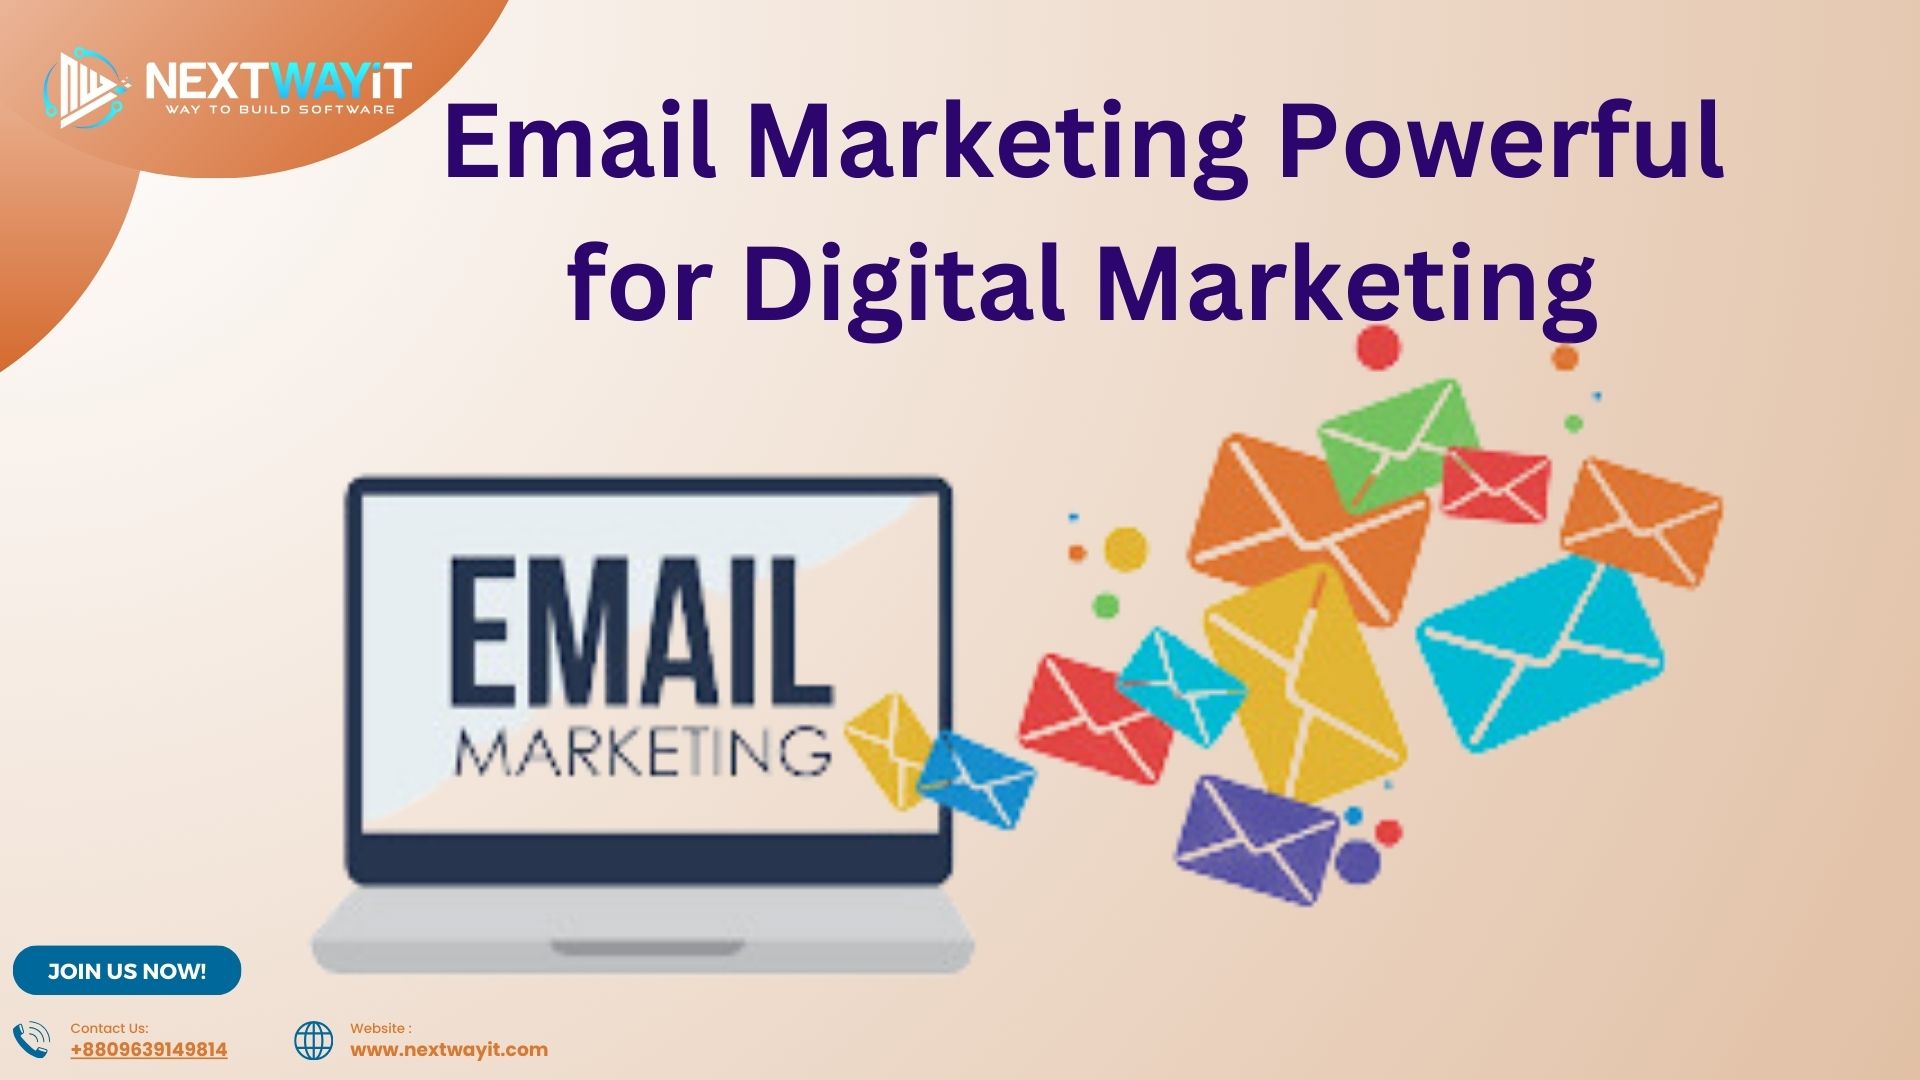 why email marketing is powerful for digital marketing